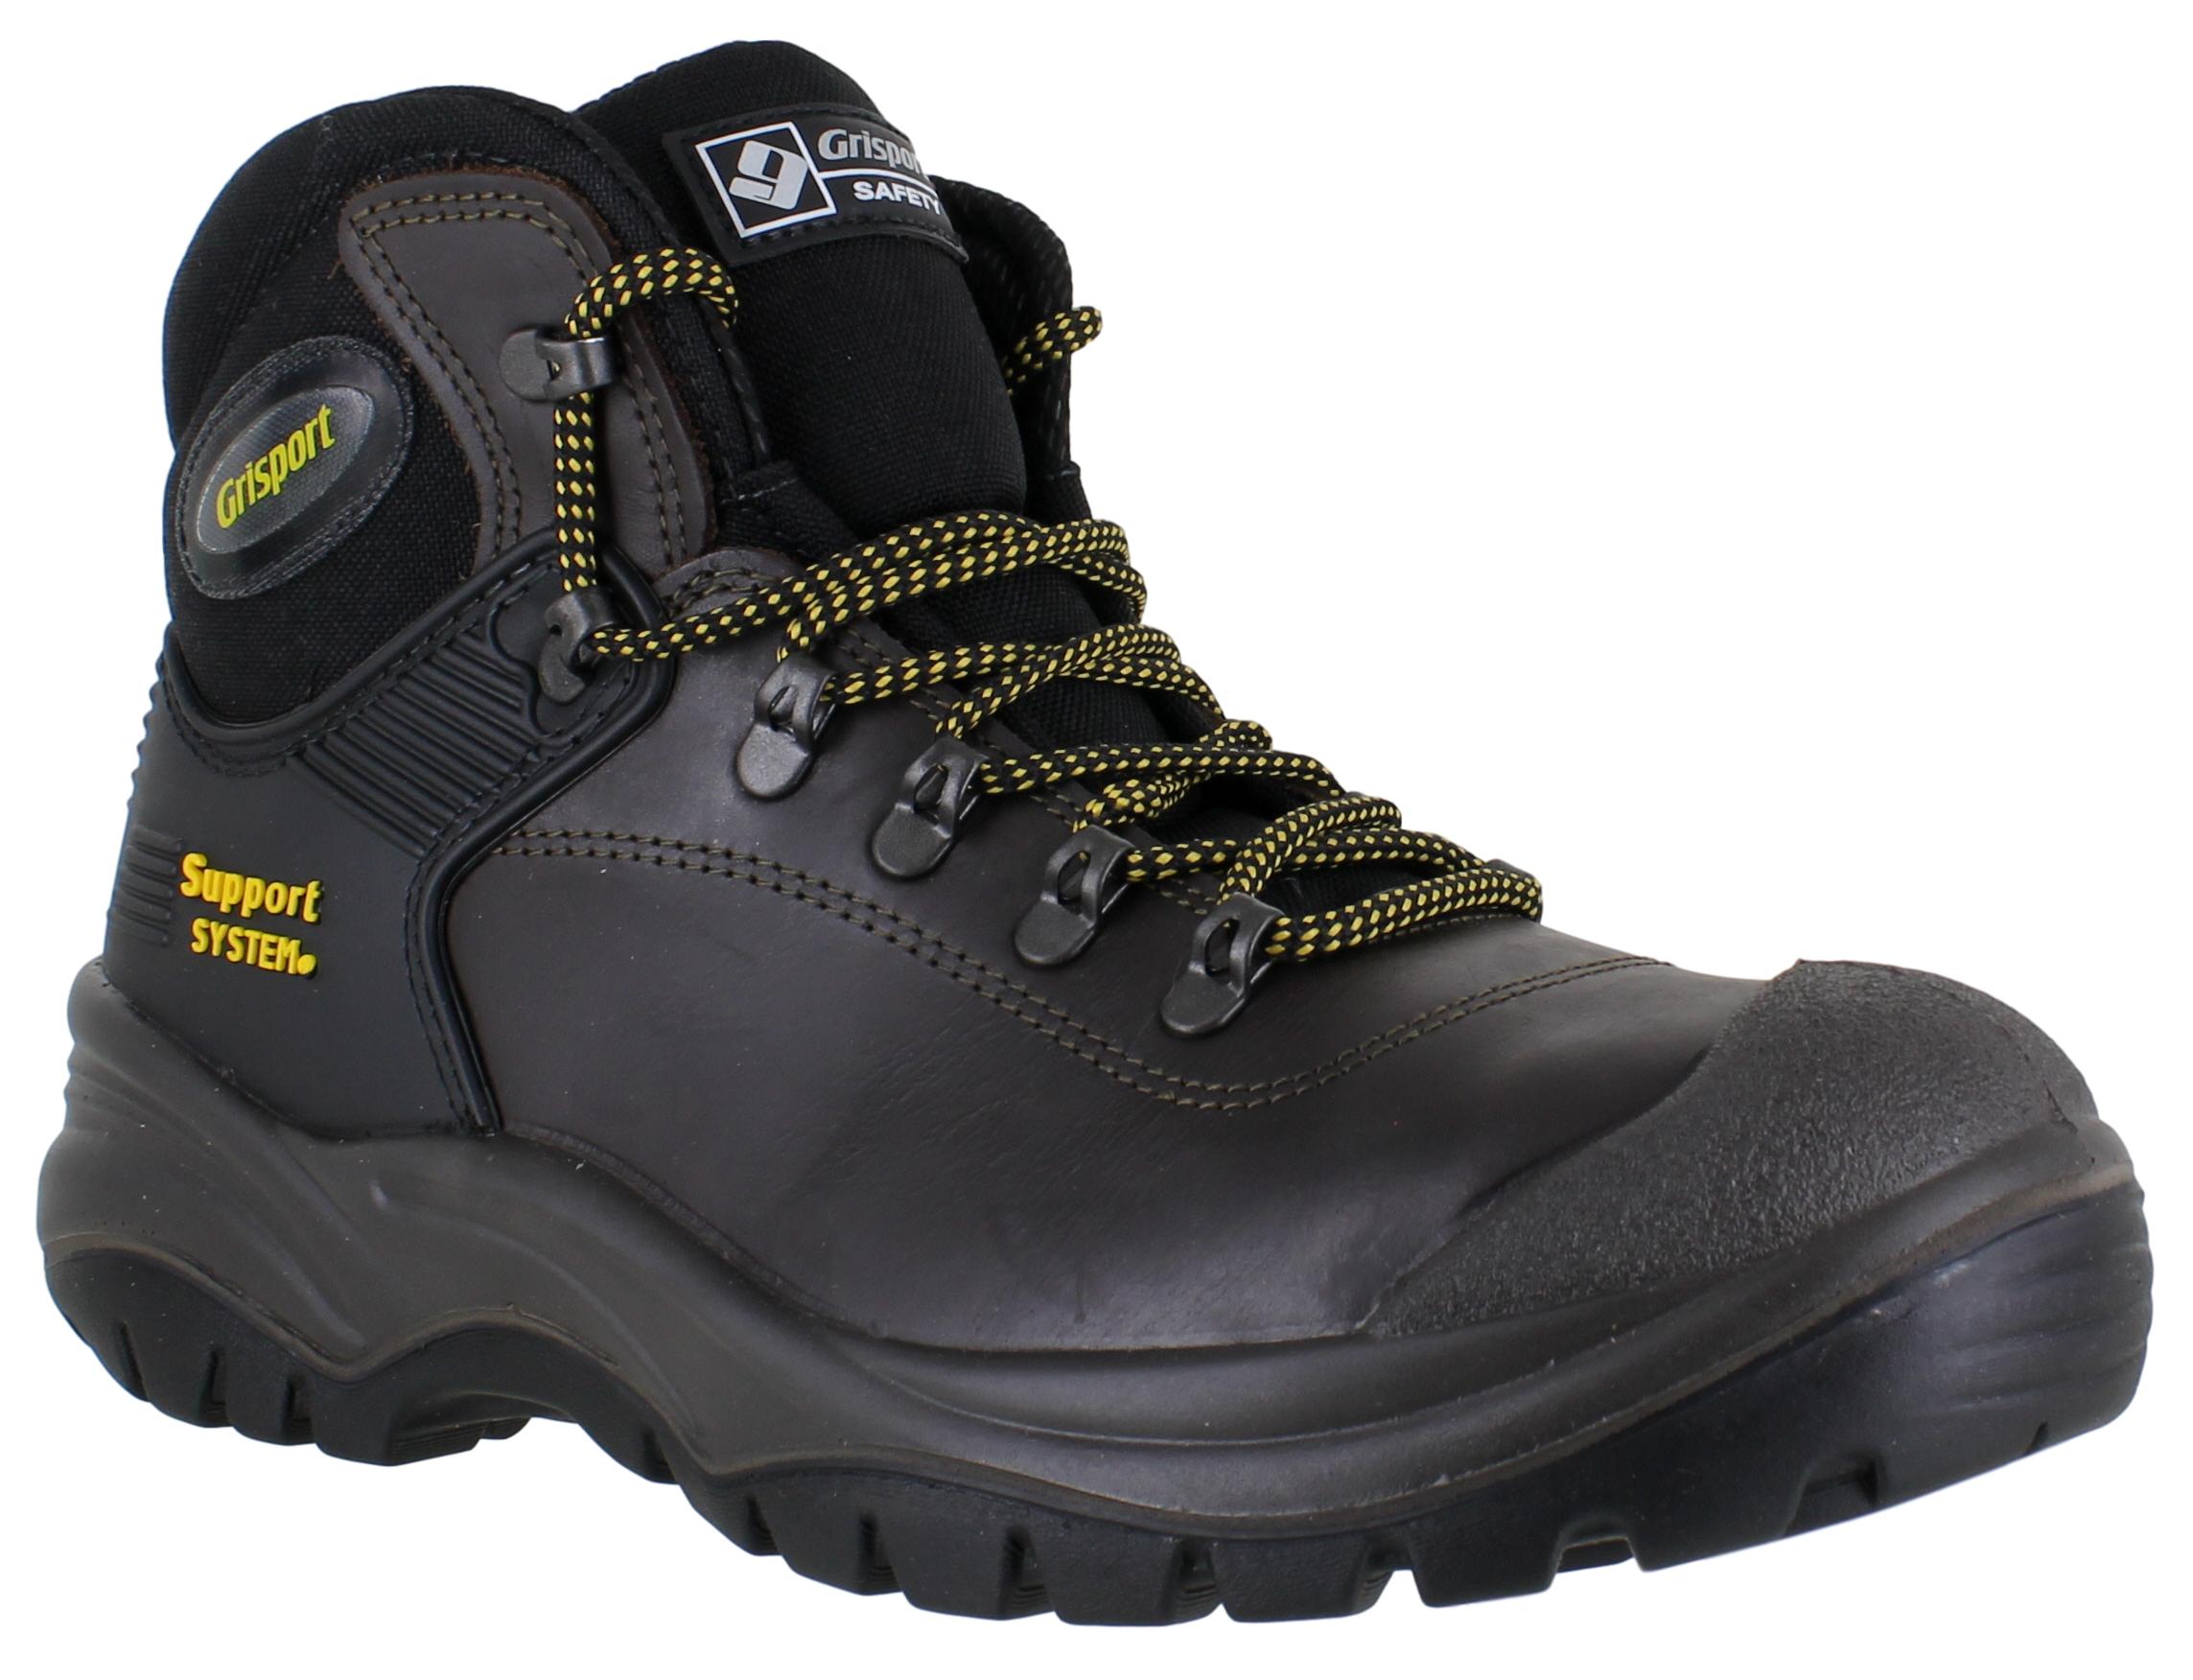 grisport contractor safety boot